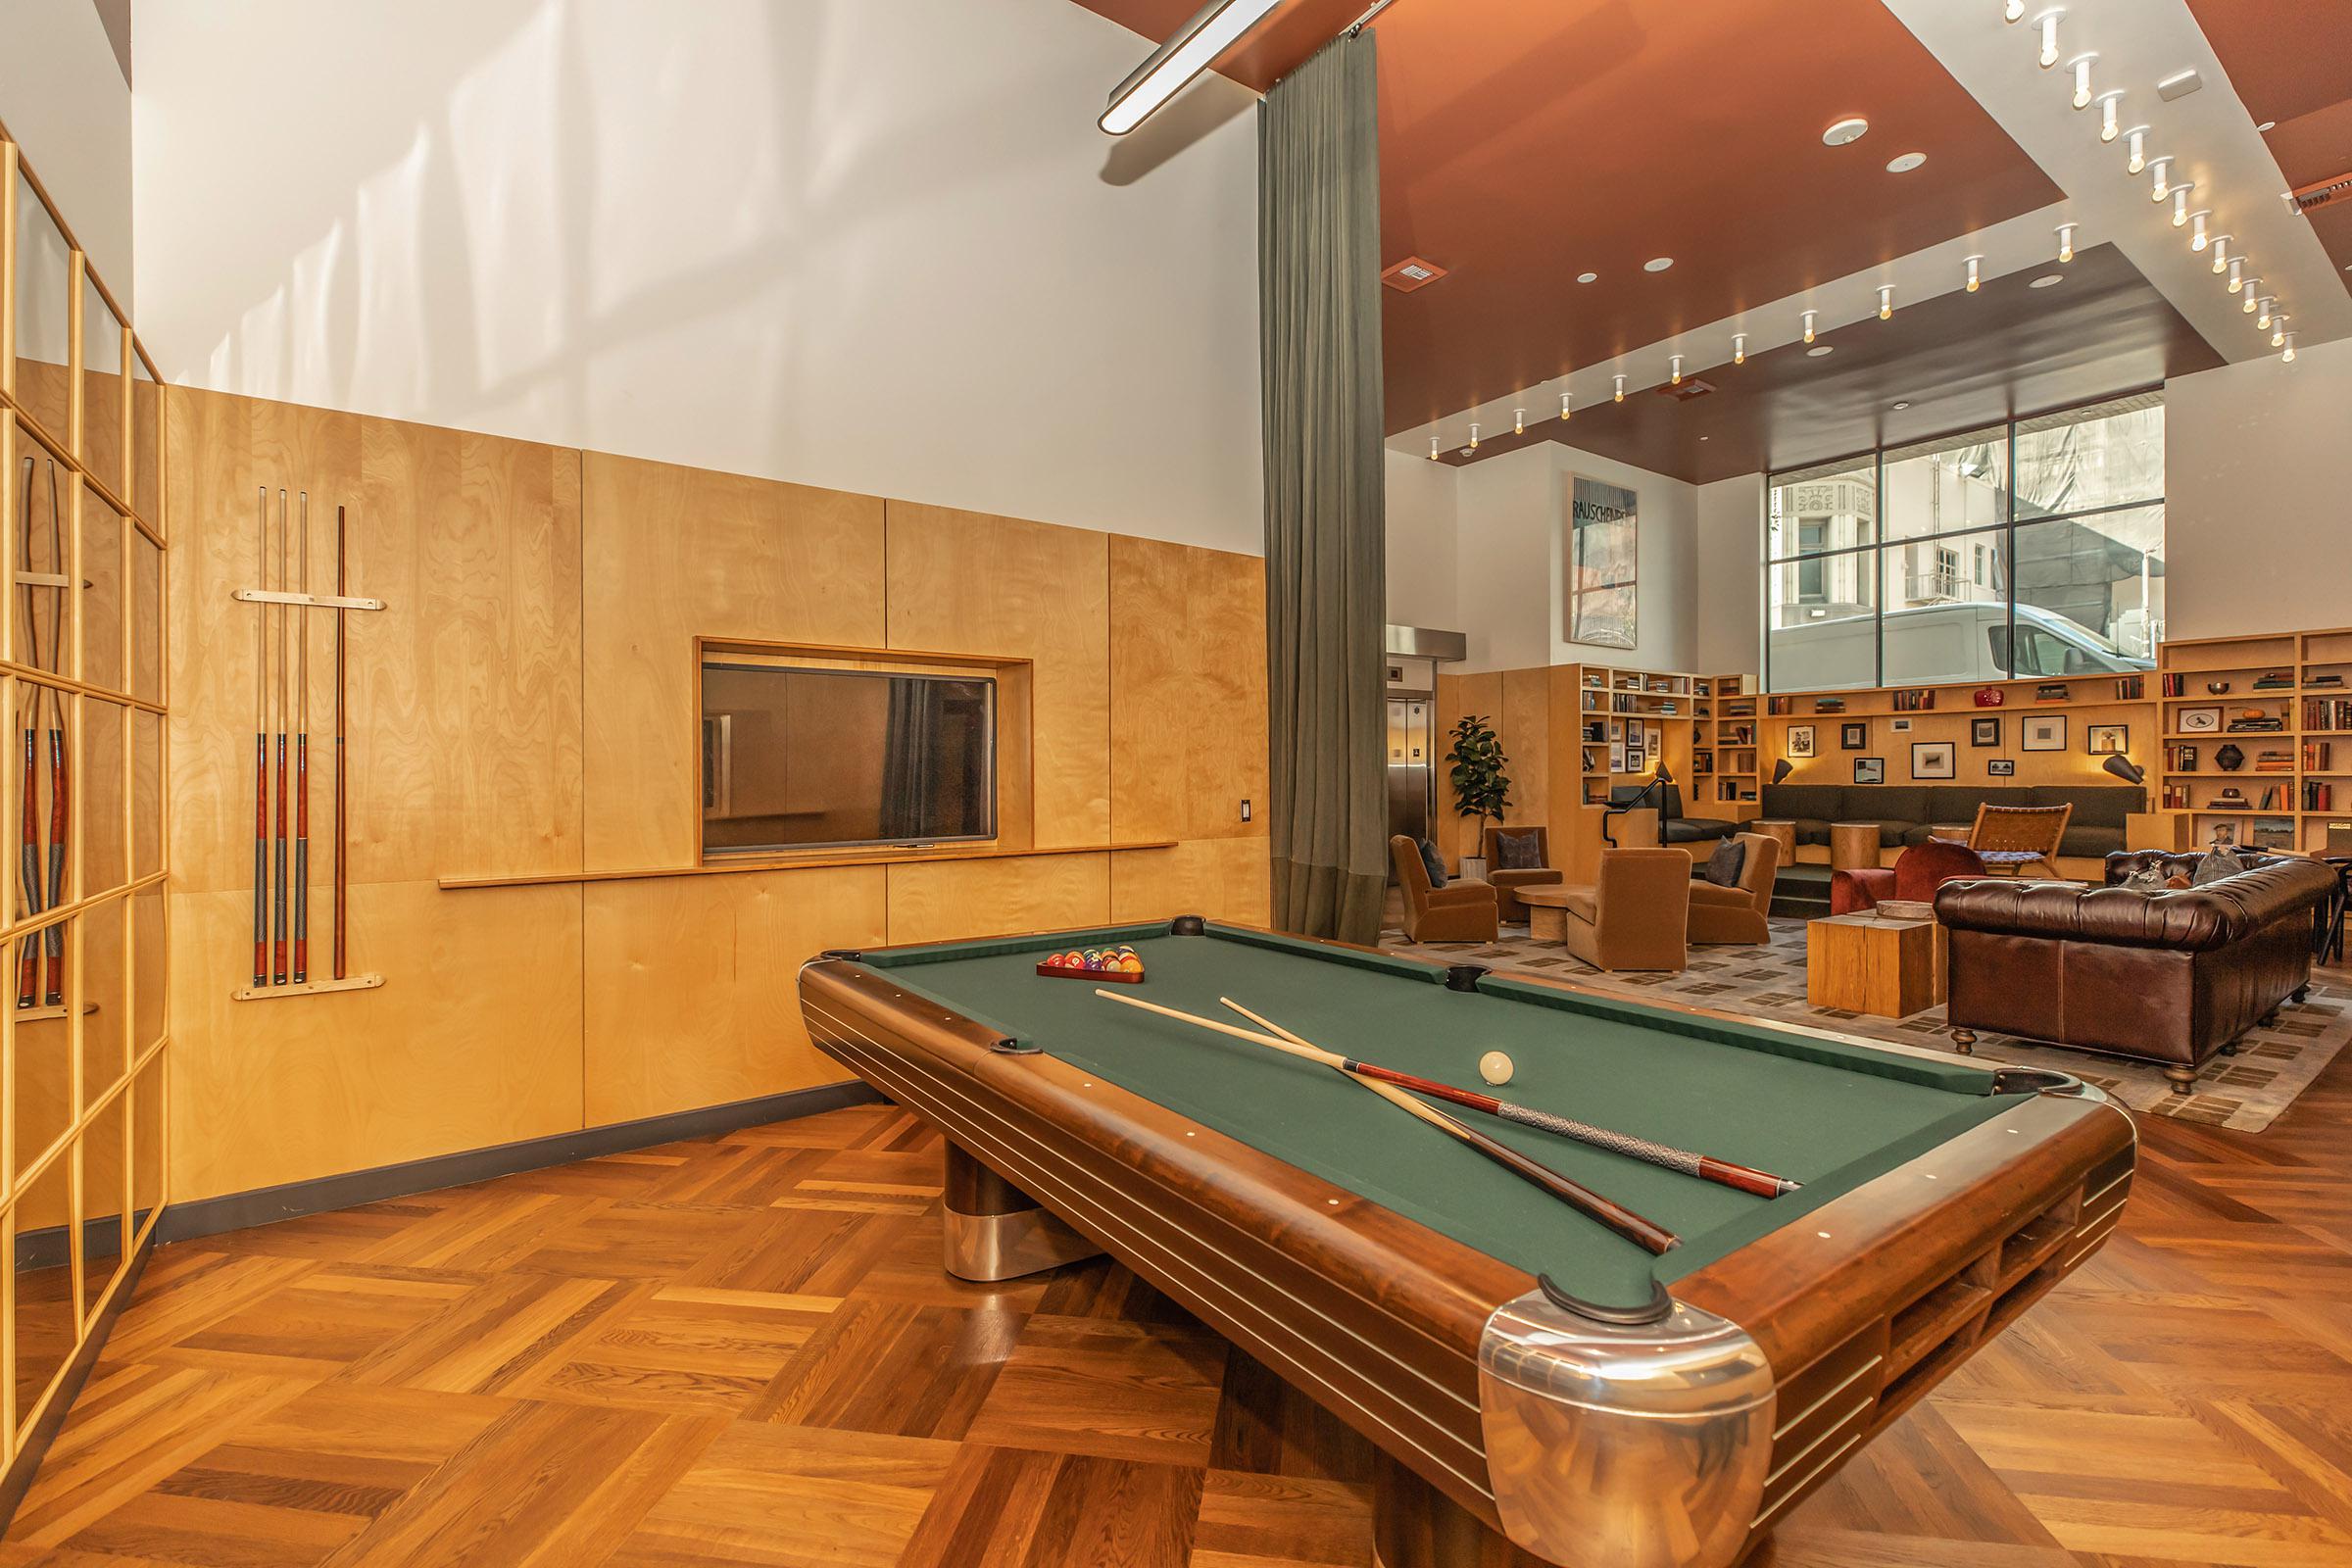 Eastown Apartments community room with a pool table